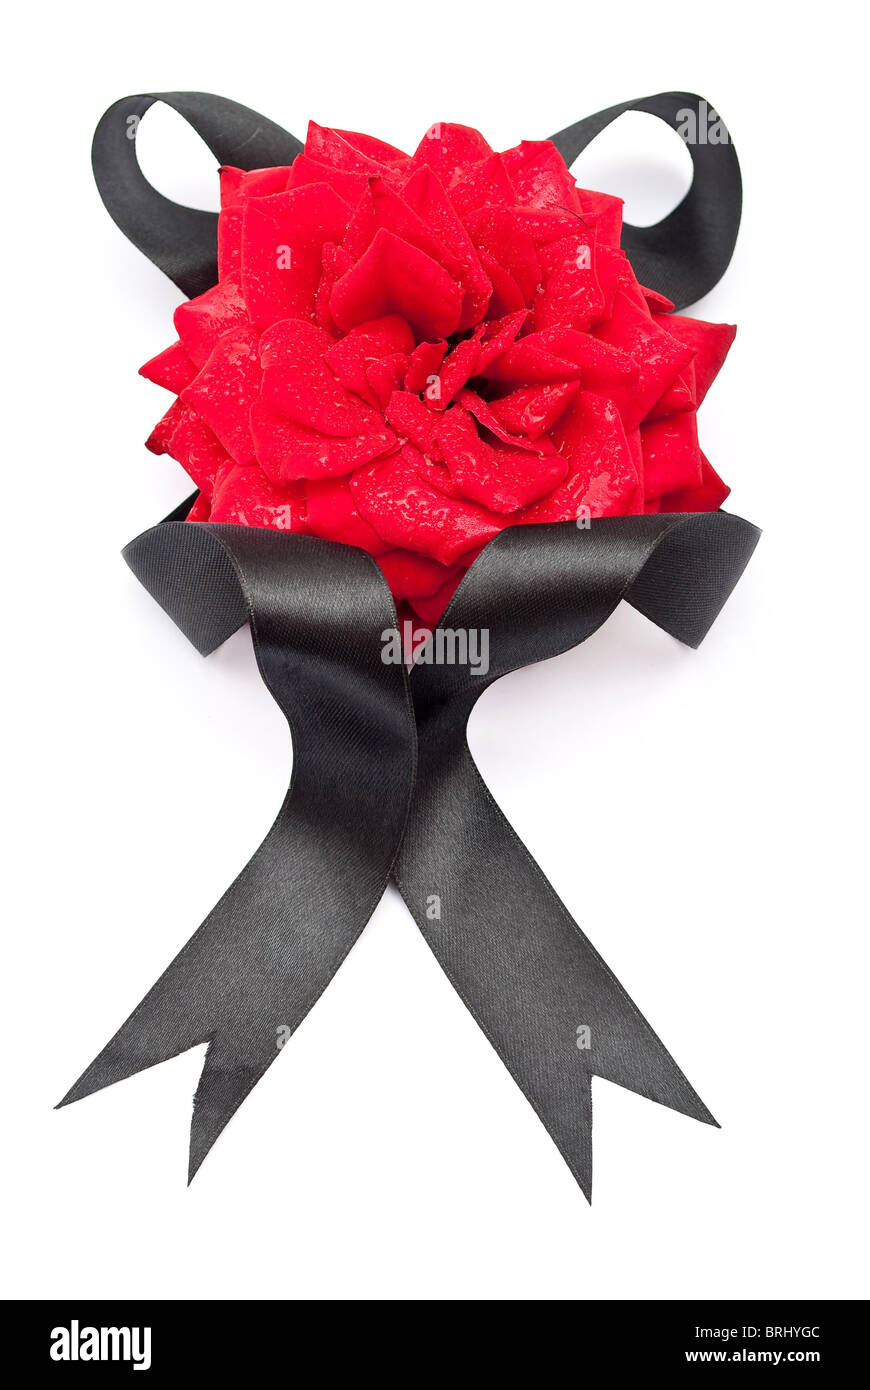 A stylish decoration of red rose flowers, ribbons on a shiny black